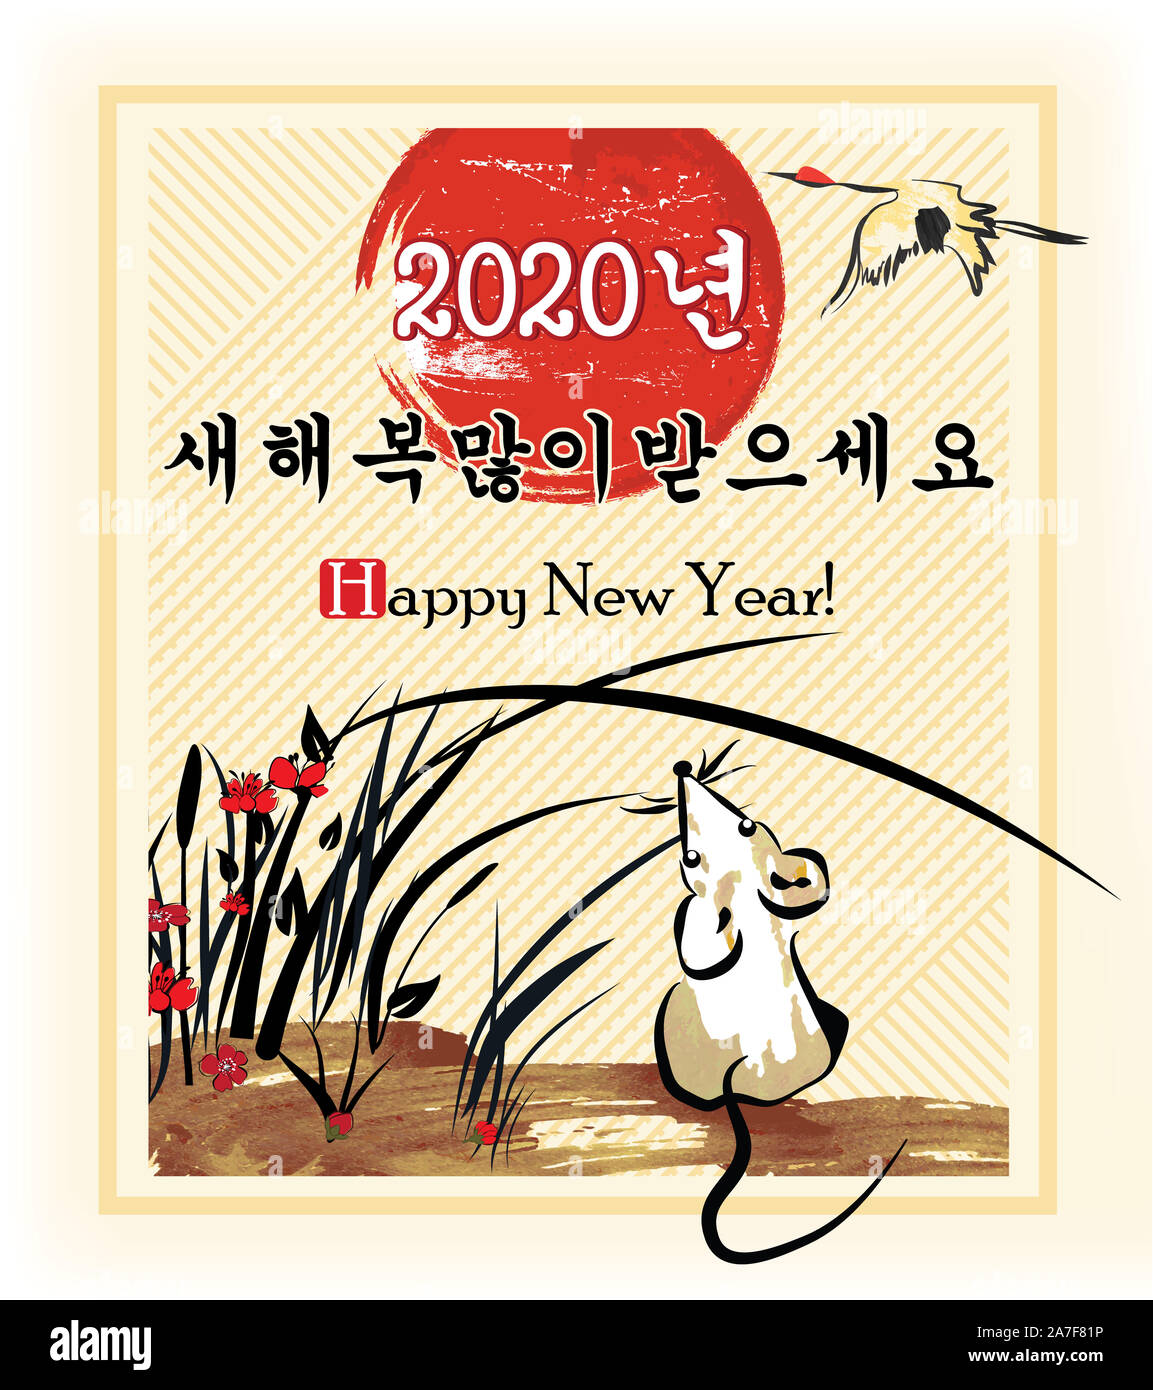 Korean greeting card for the New Year of the Metal Rat 2020 celebration. The message (Happy New Year) is written in English and Korean. Stock Photo